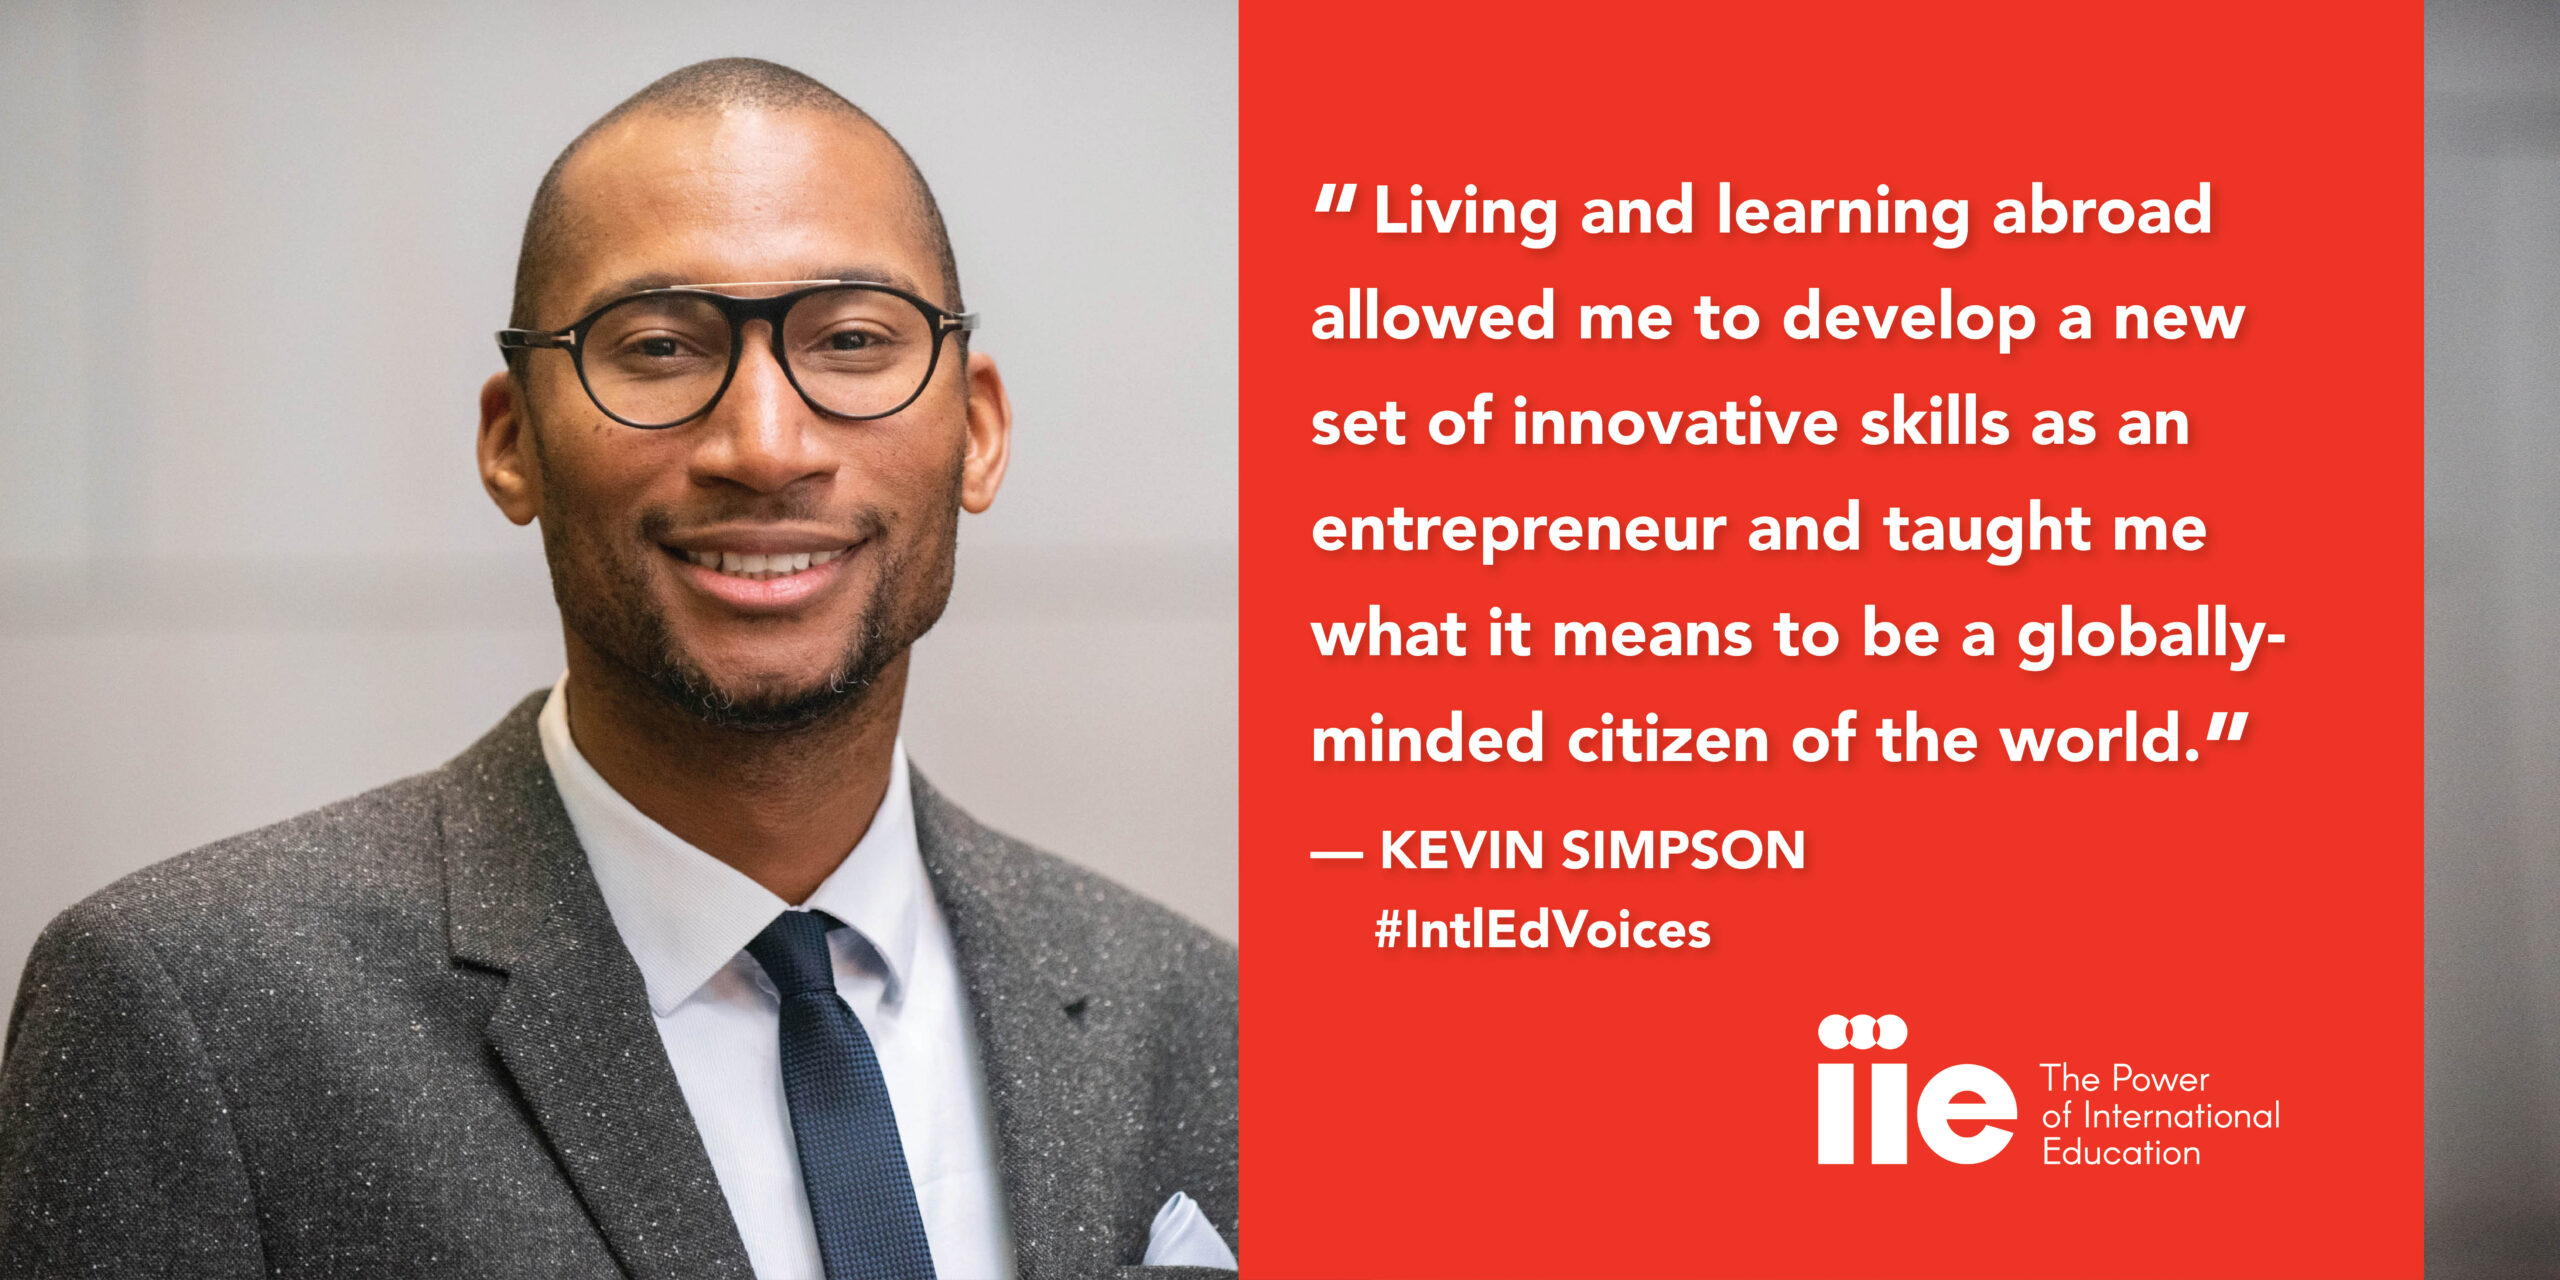 IntledVoices -Kevin